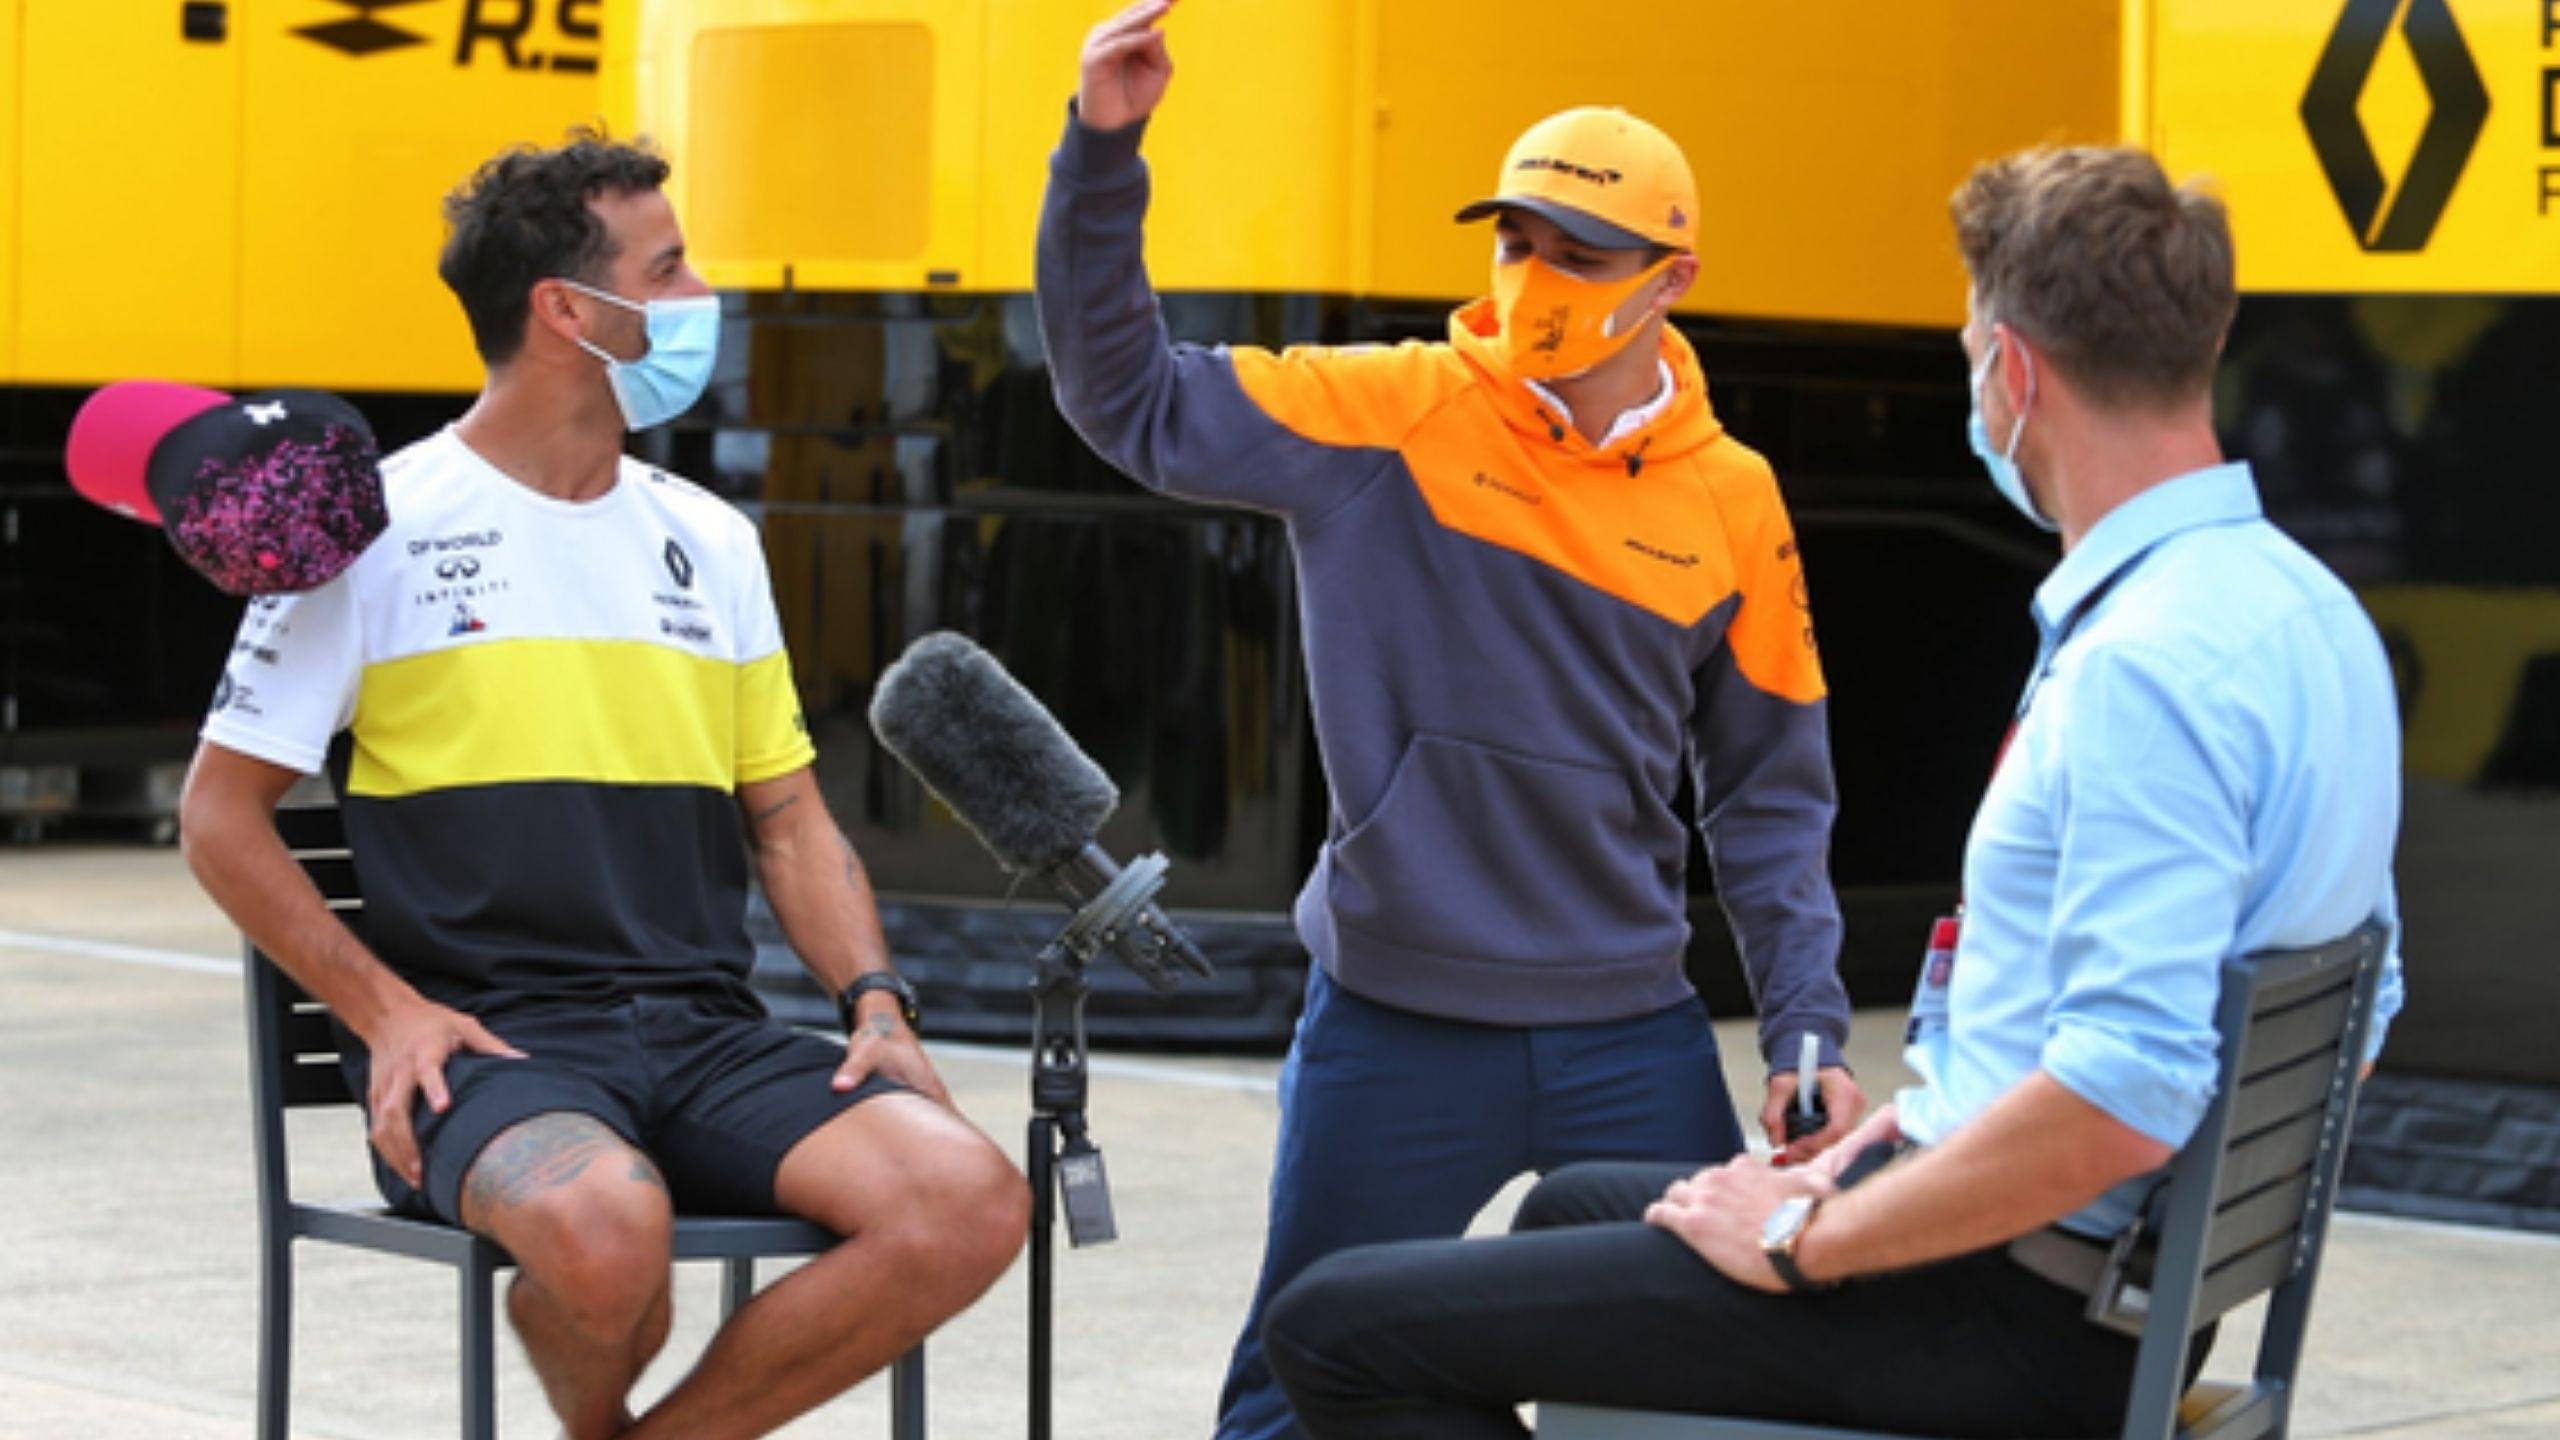 Daniel Ricciardo will be missed at Renault after he moves to McLaren, admits executive director Marcin Budkowski